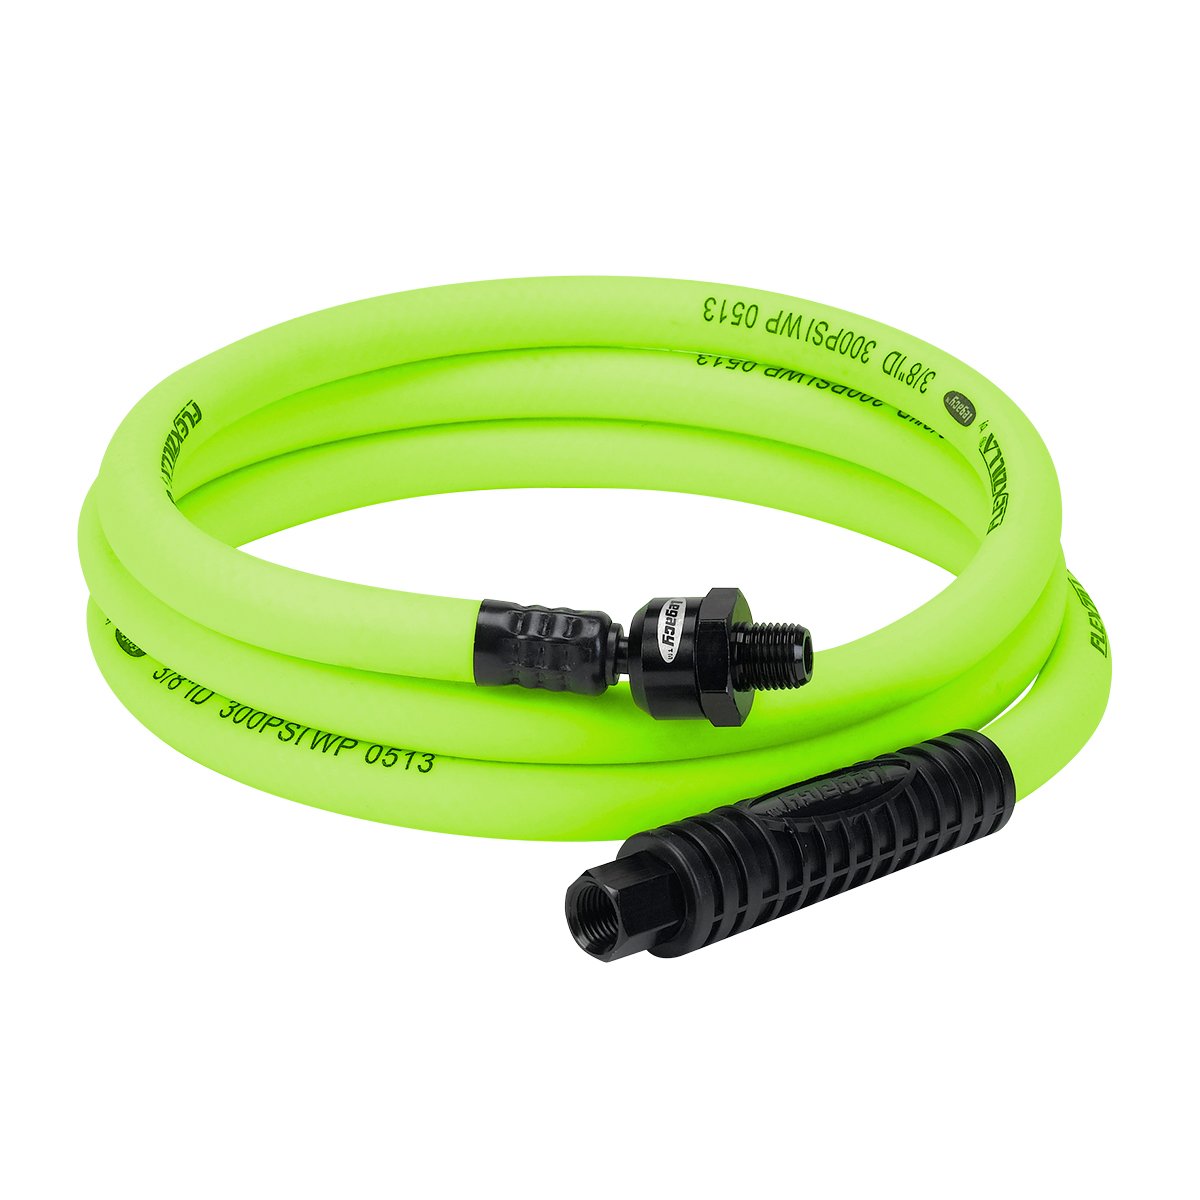 Flexzilla 3/8" x 6' FT Air Hose Whip With Ball Swivel 300PSI Working Pressure